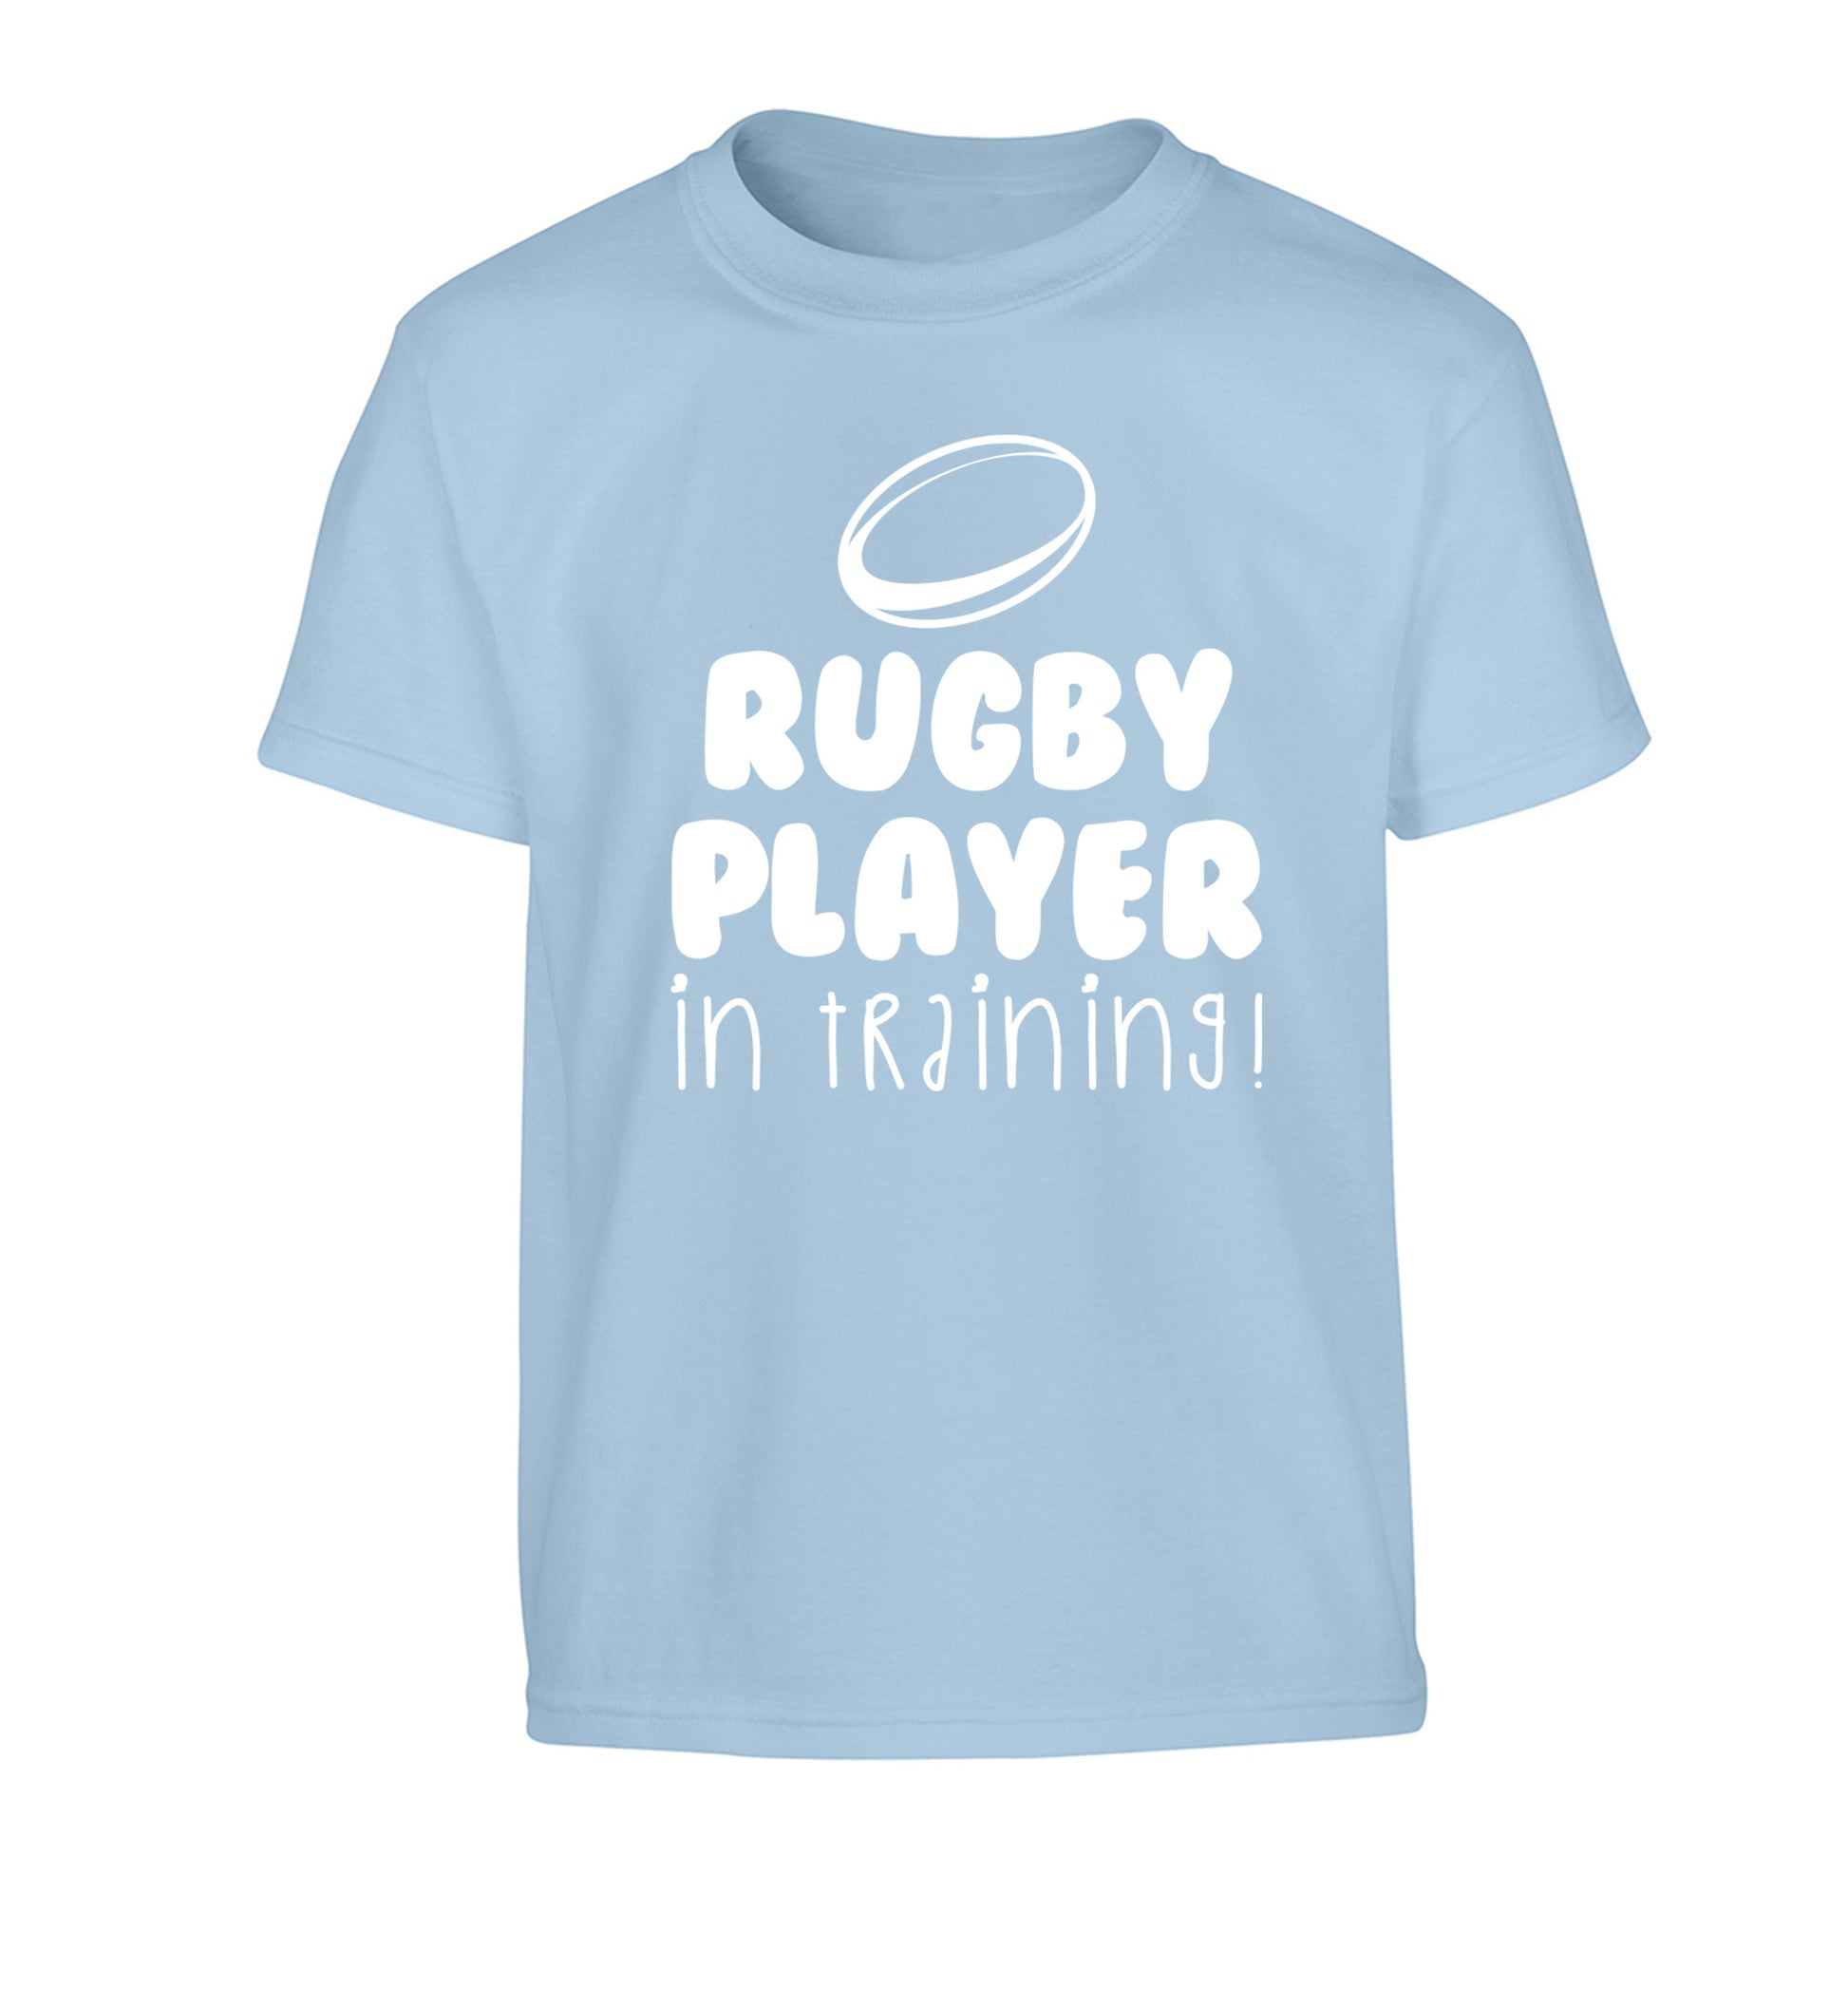 Rugby player in training Children's light blue Tshirt 12-14 Years